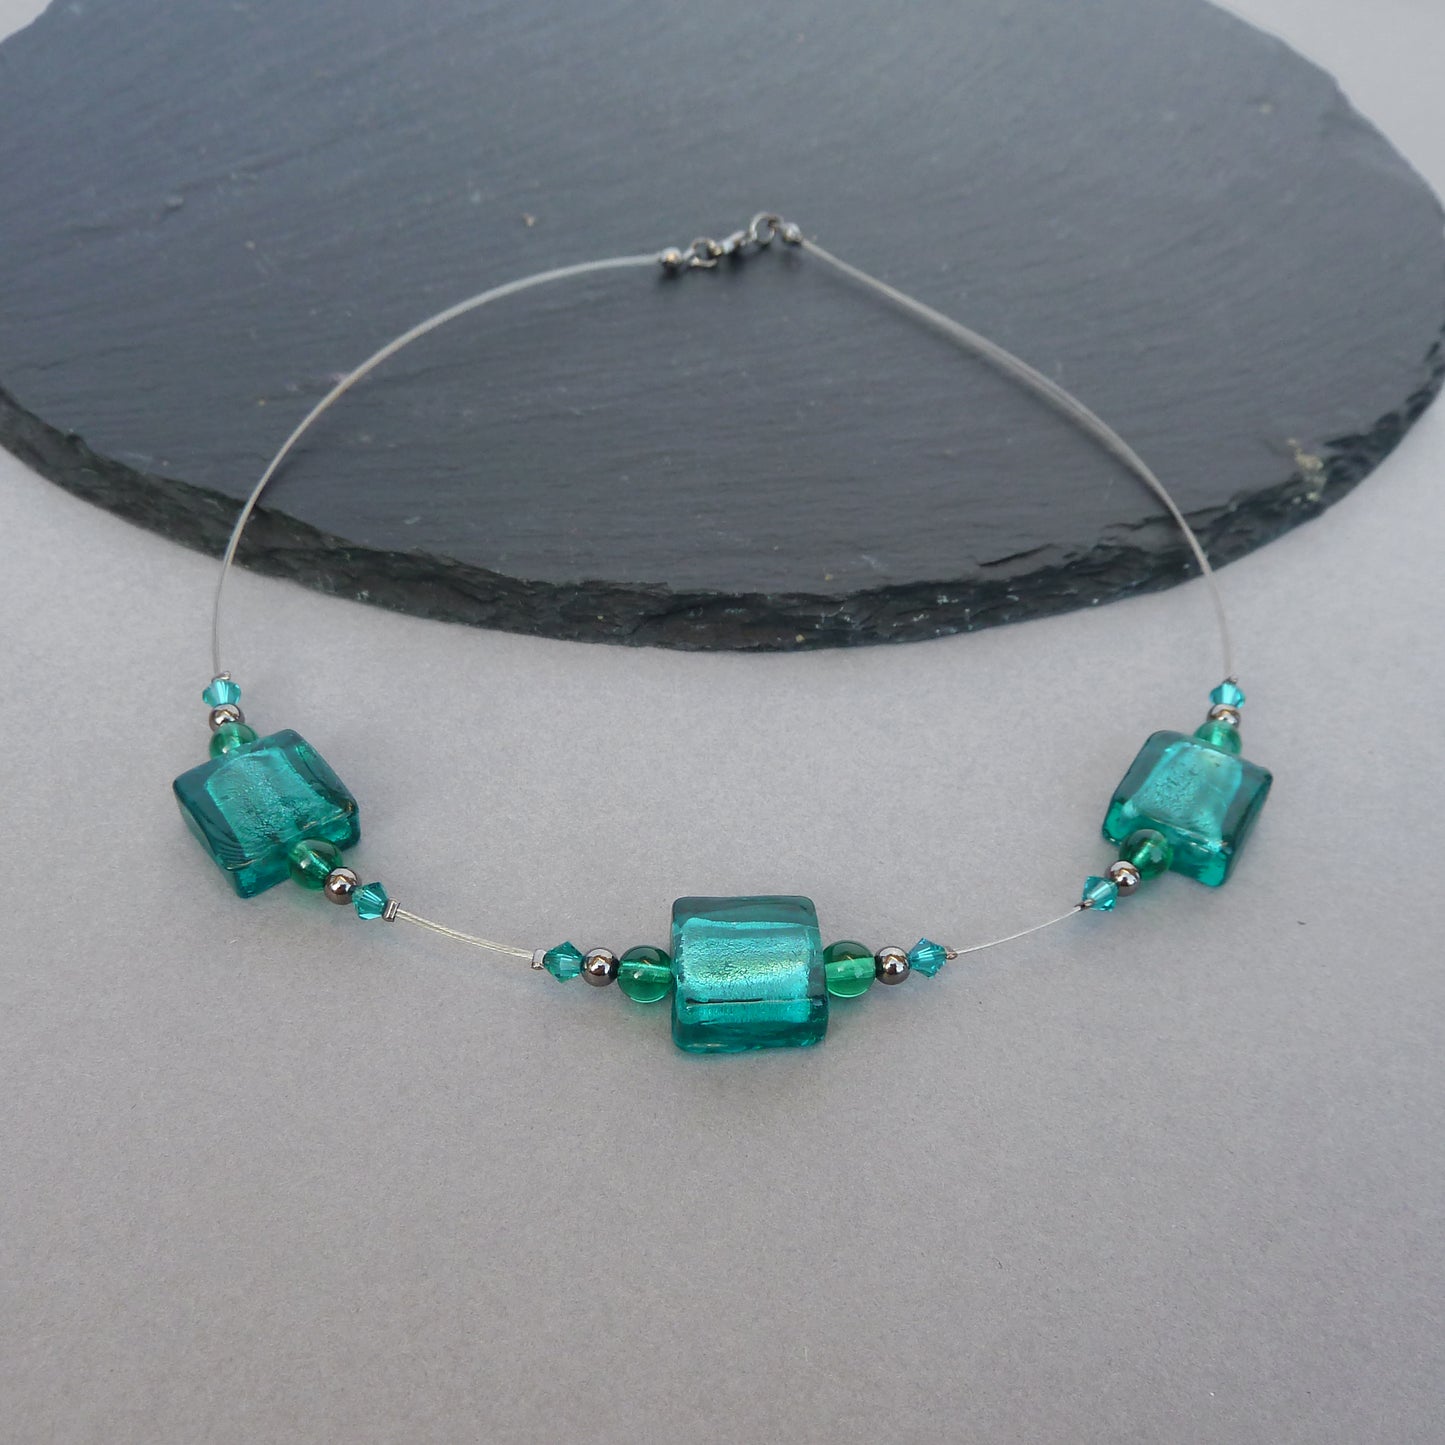 Emerald green glass bead necklace